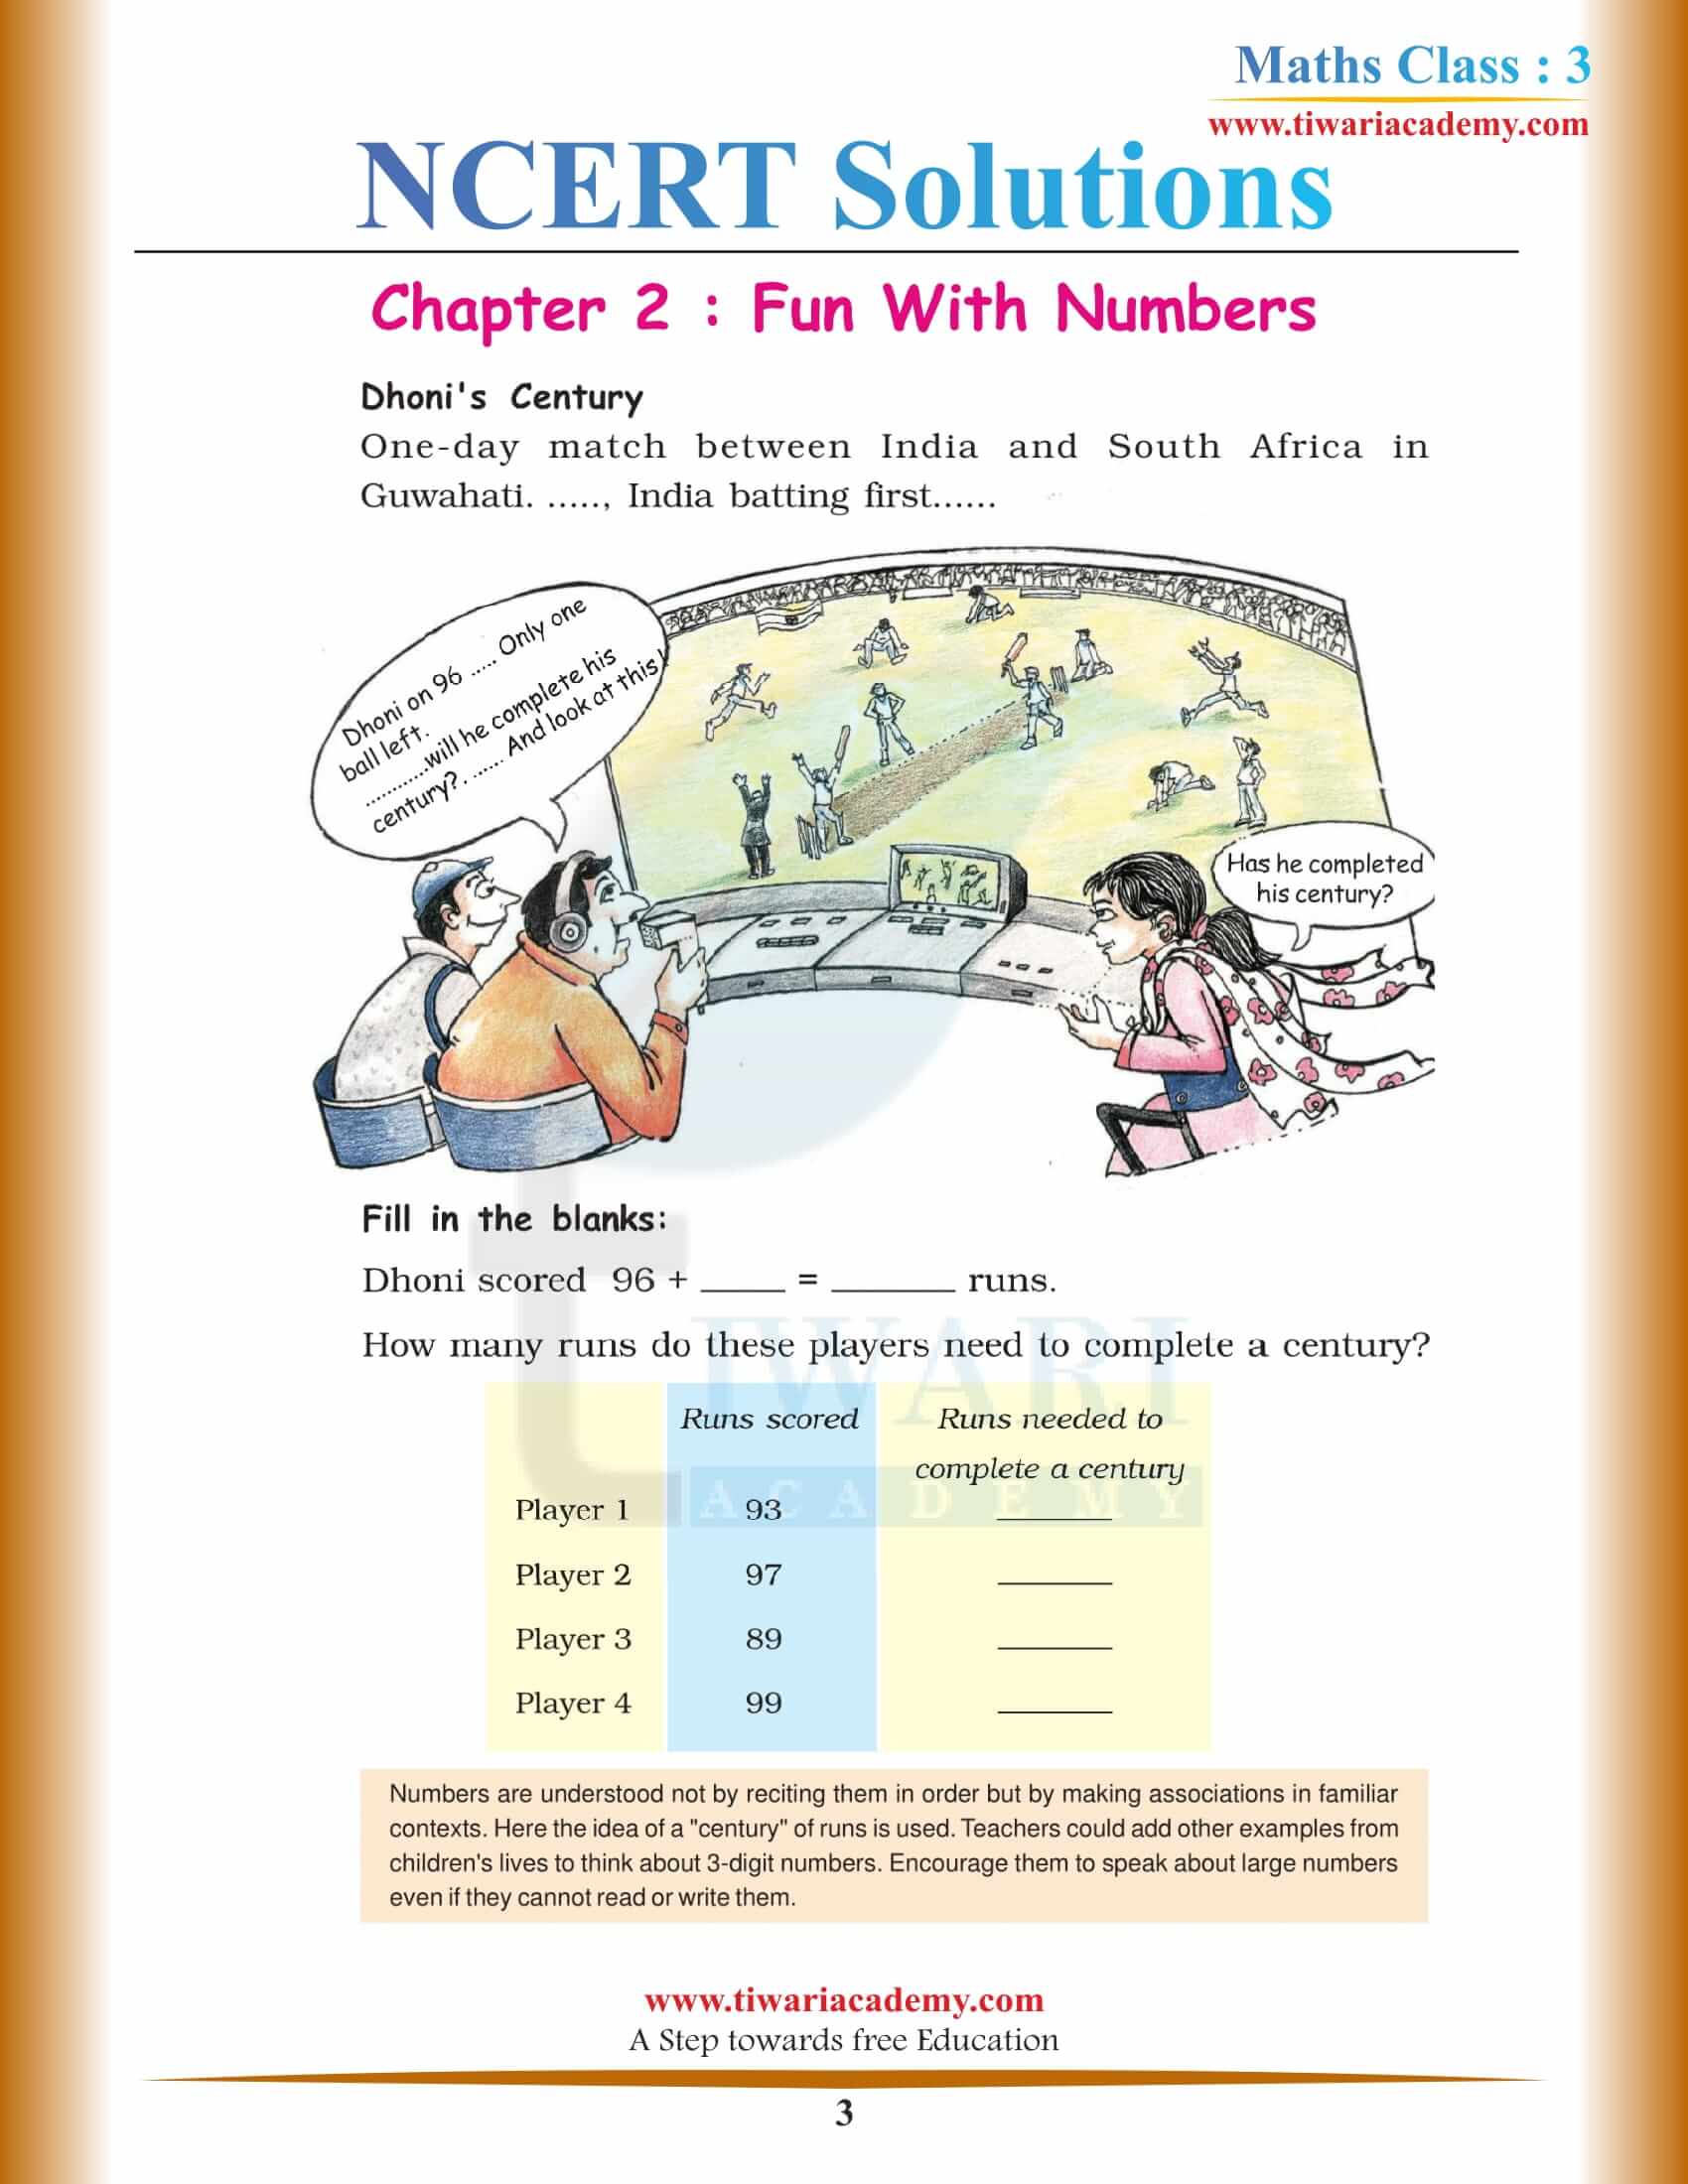 NCERT Solutions for Class 3 Maths Chapter 2 in PDF